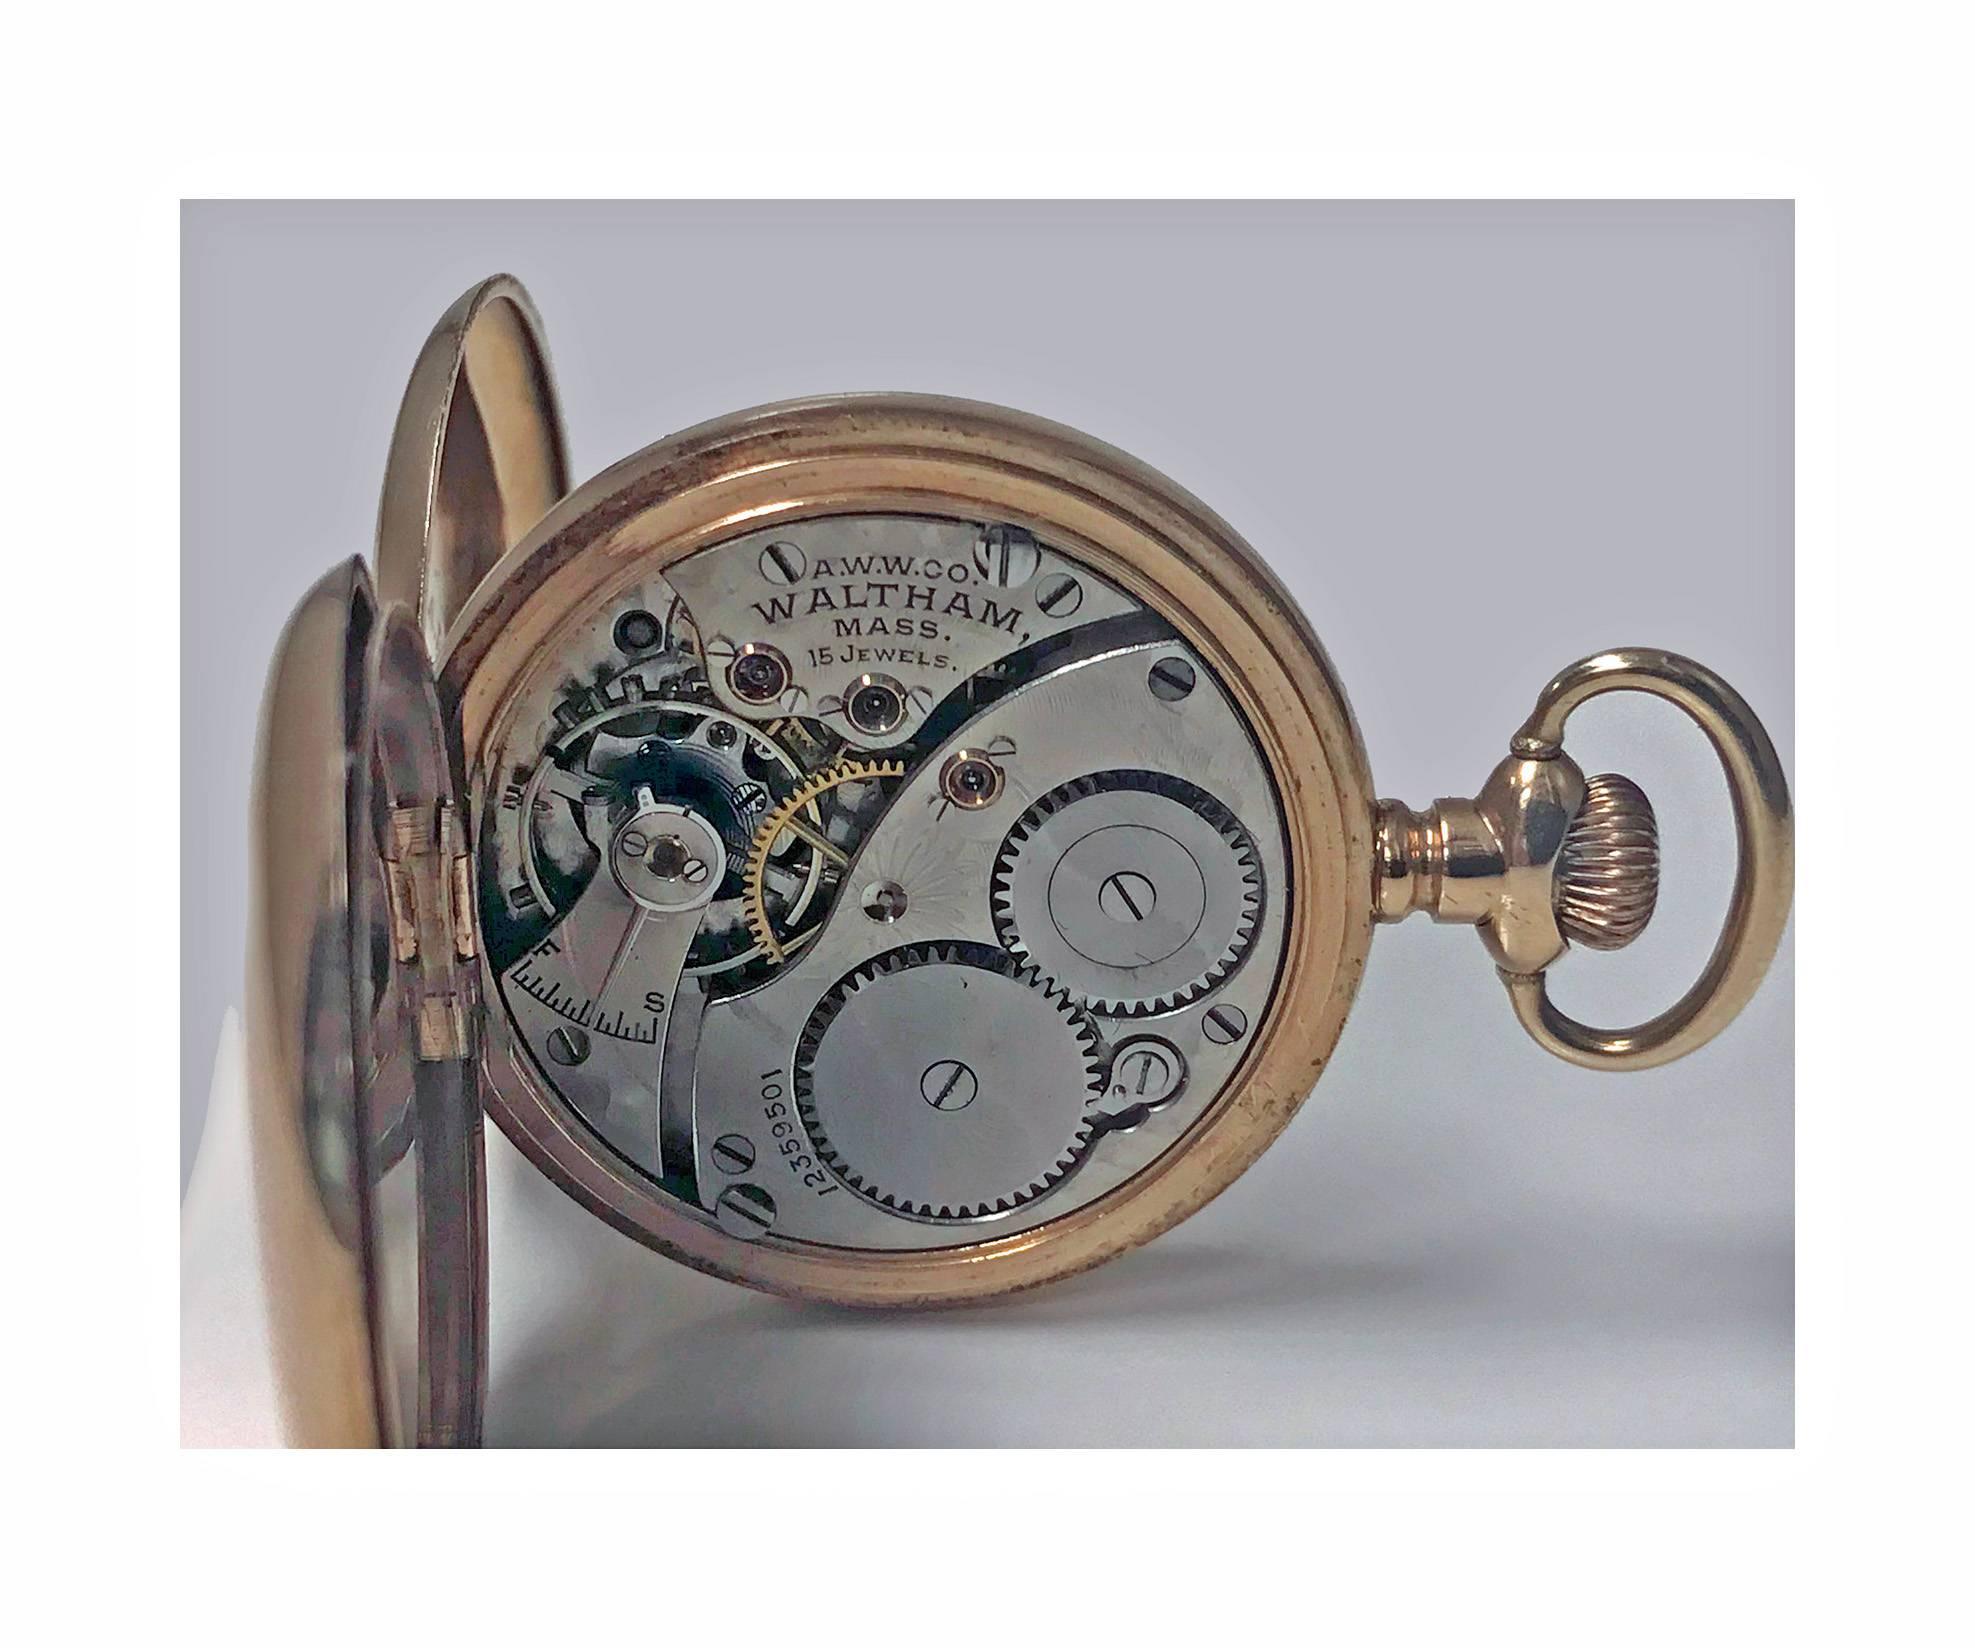 An American Waltham 14-karat stem wind Gold Hunter case pocket watch, circa 1900. Case width 33mm. White porcelain dial with black Roman numerals, and an outer five-minute increment scale in red enamel, subsidiary dial at 6; American Waltham